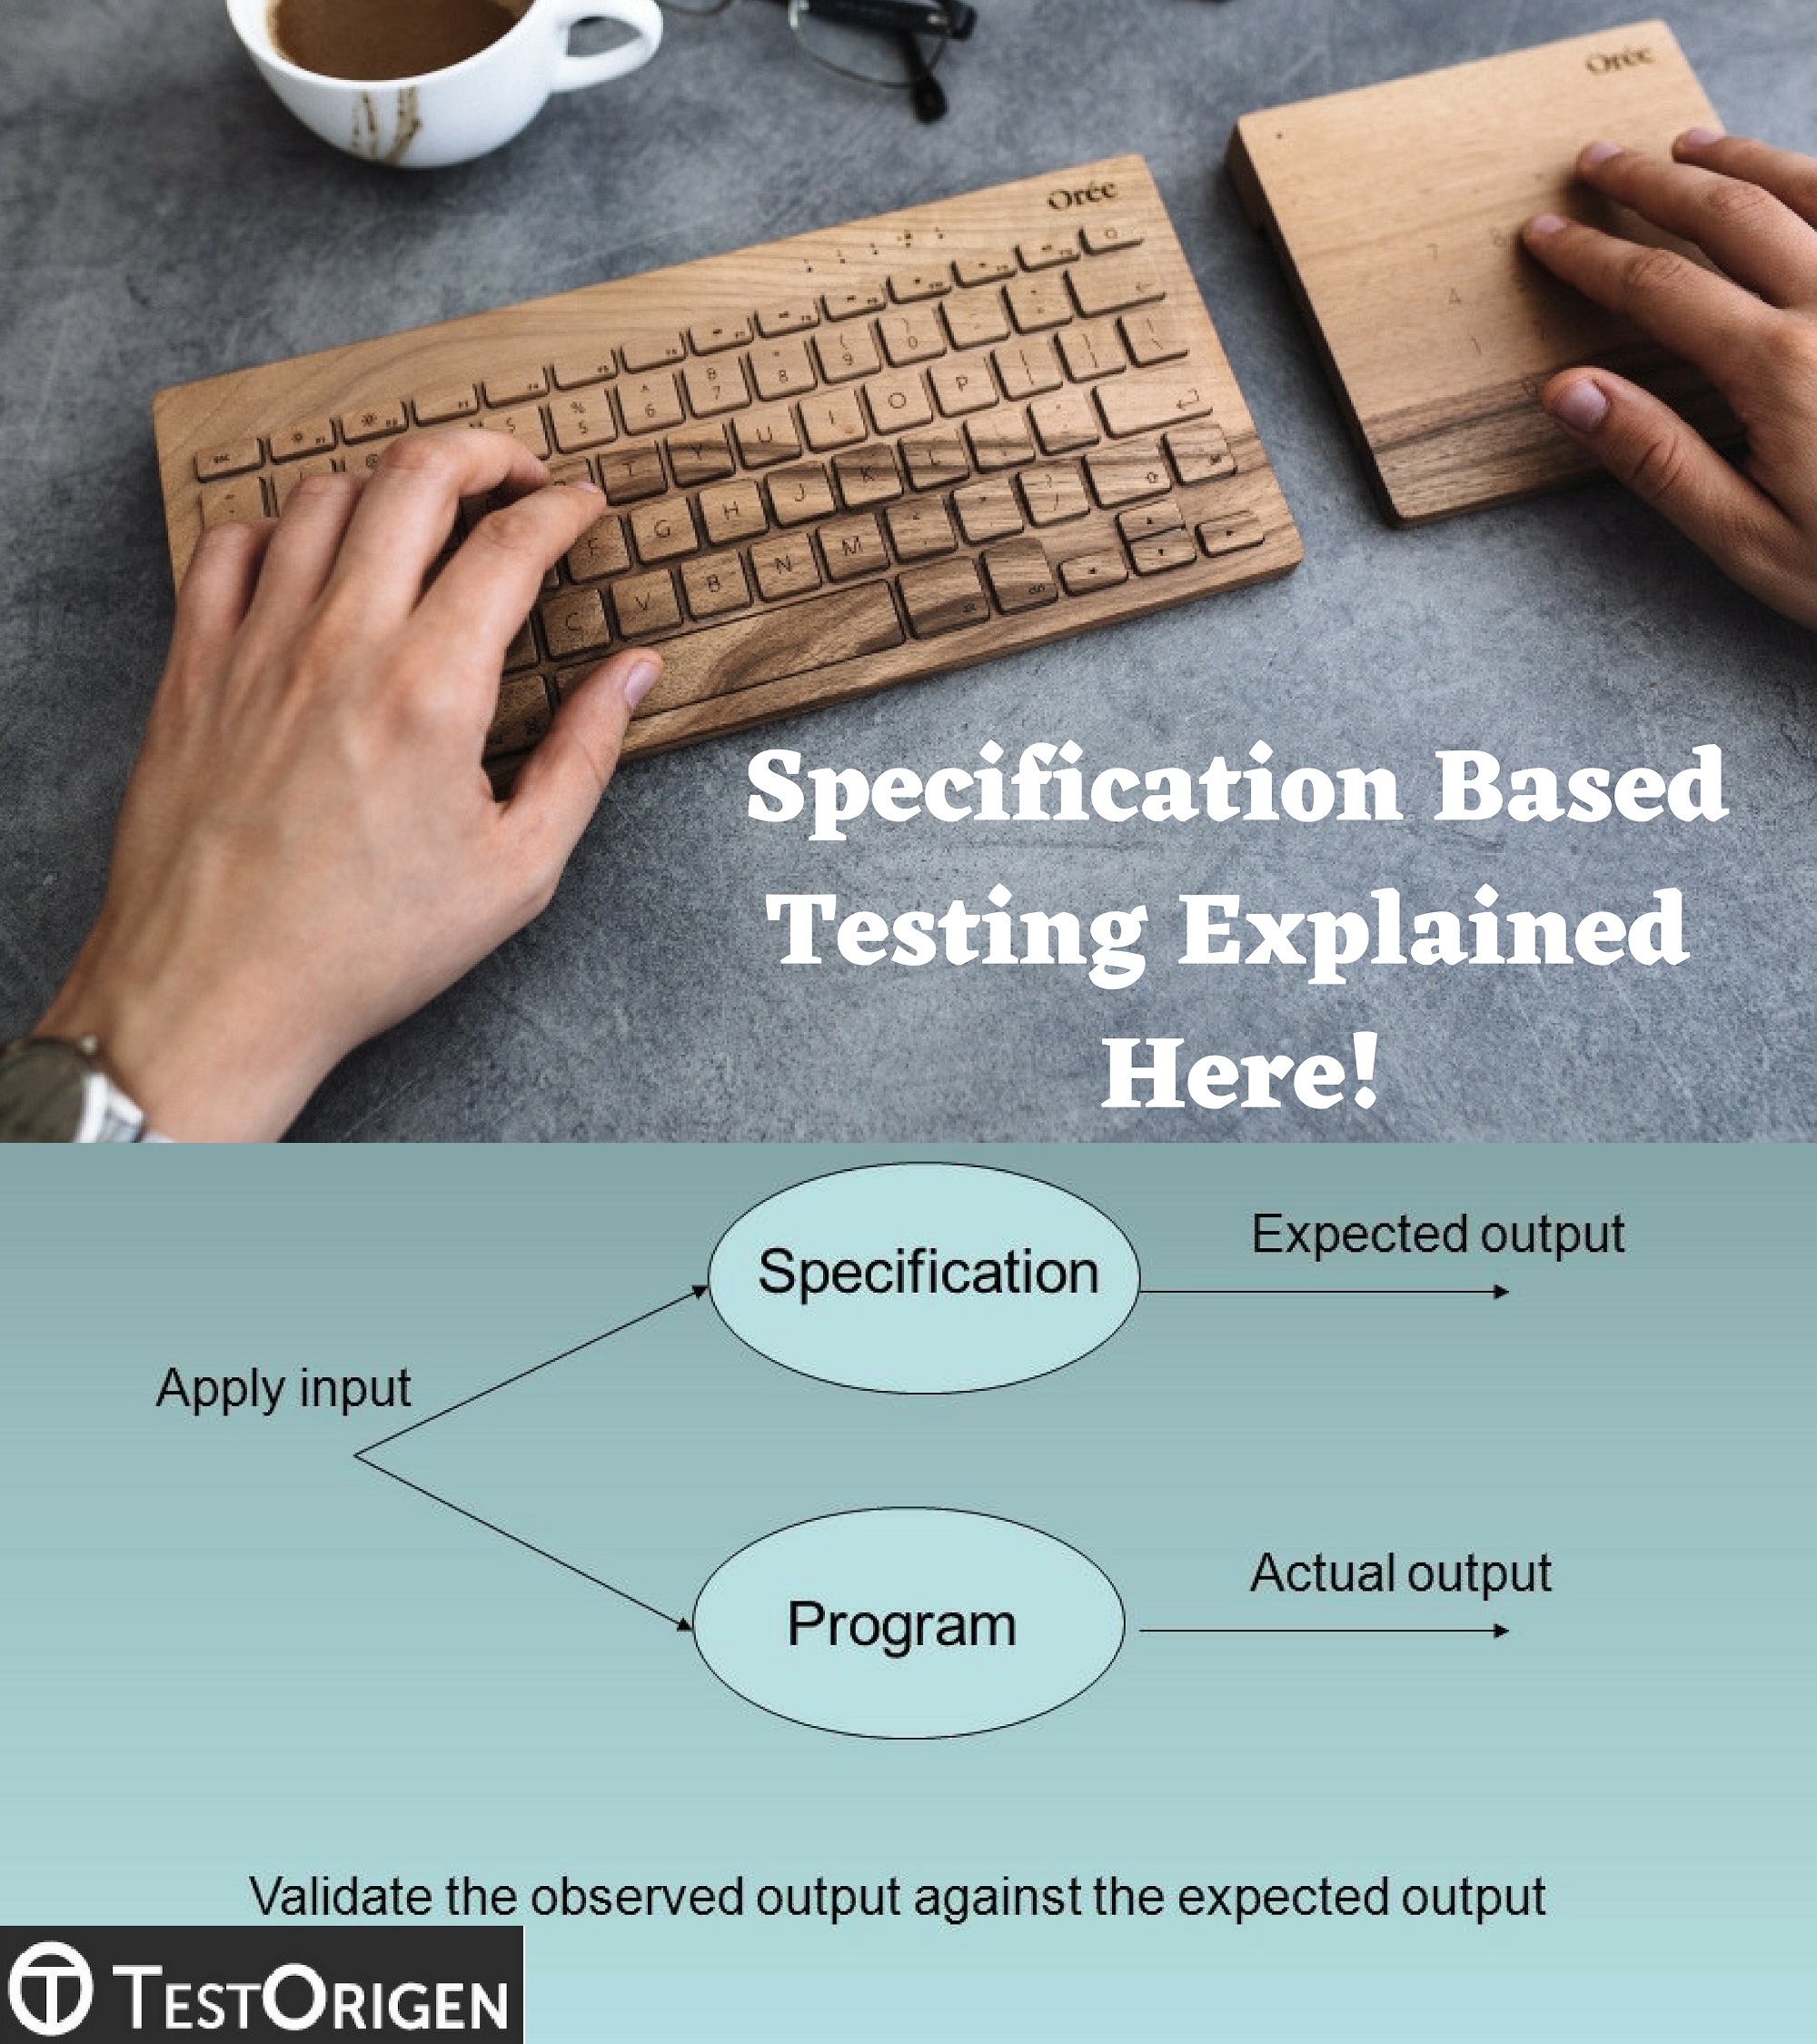 Specification Based Testing Explained Here!